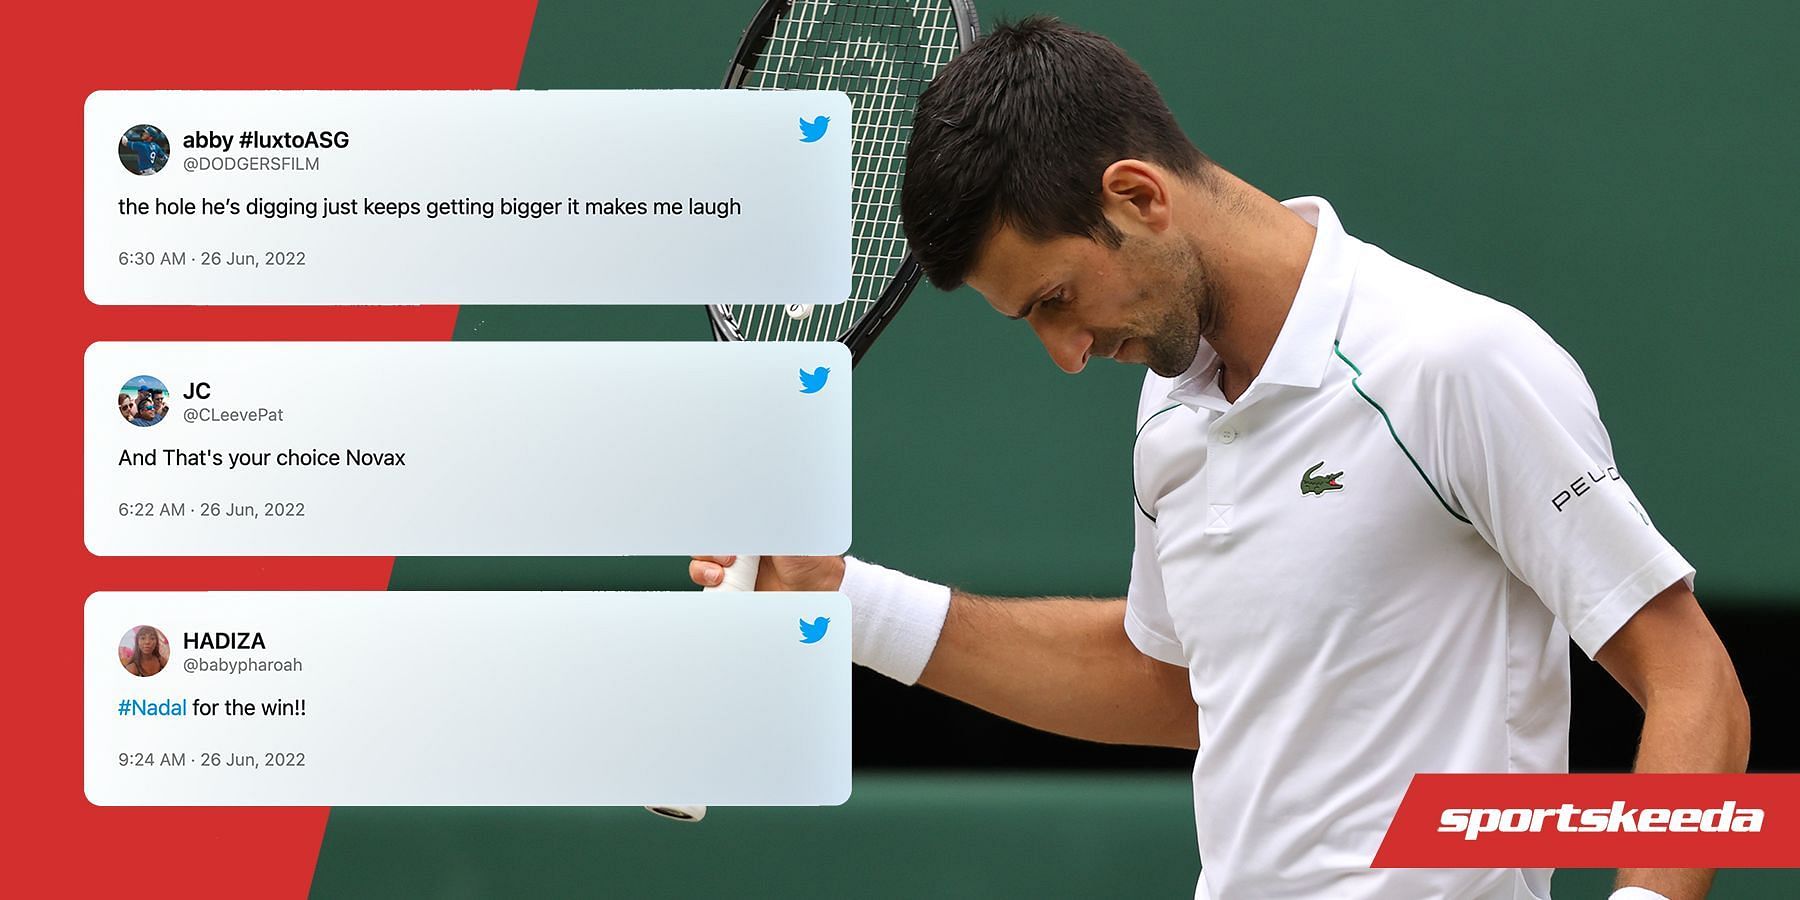 Fans react to Novak Djokovic potentially missing the US Open